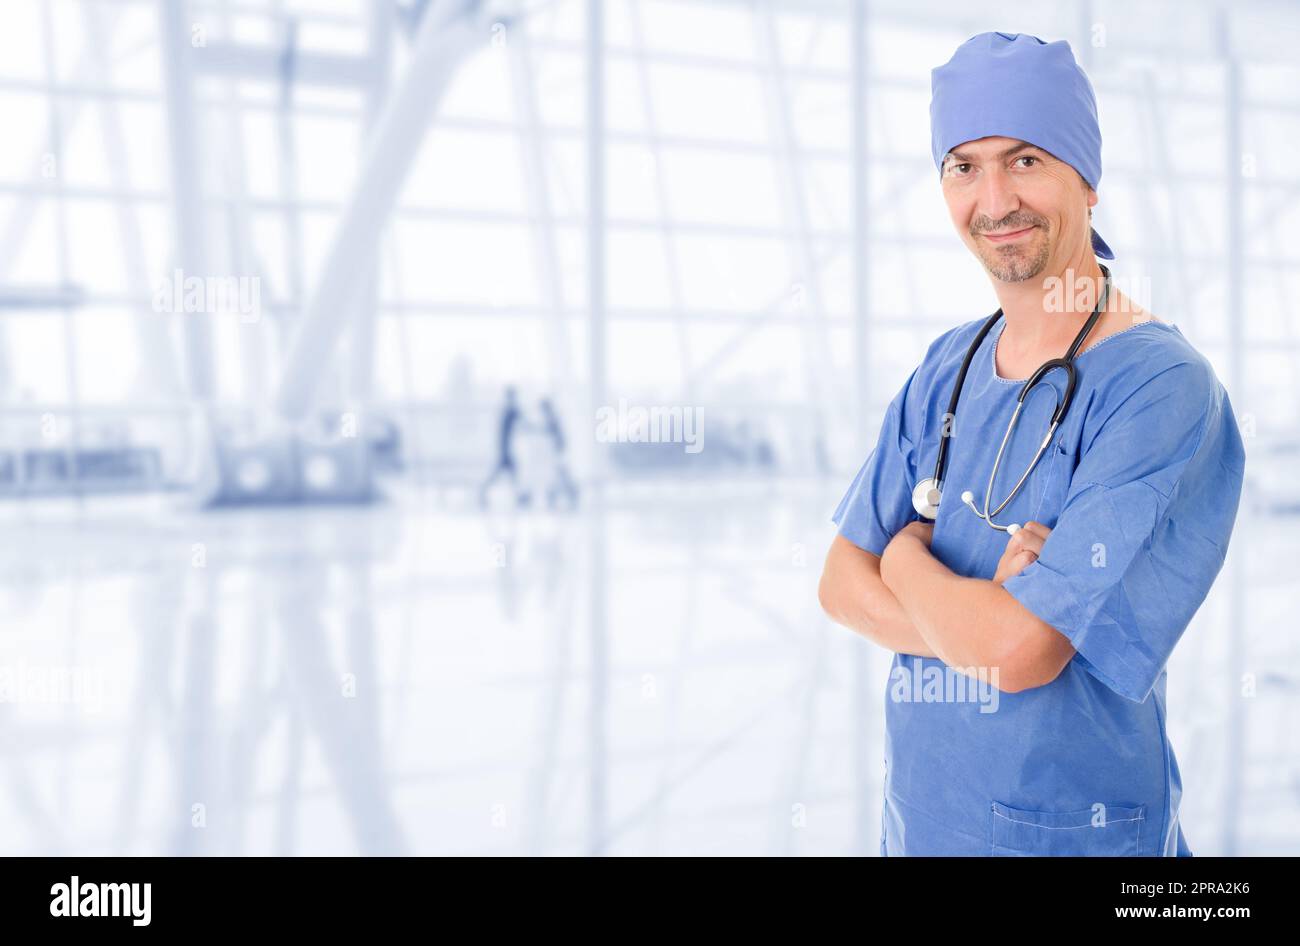 doctor at the hospital Stock Photo